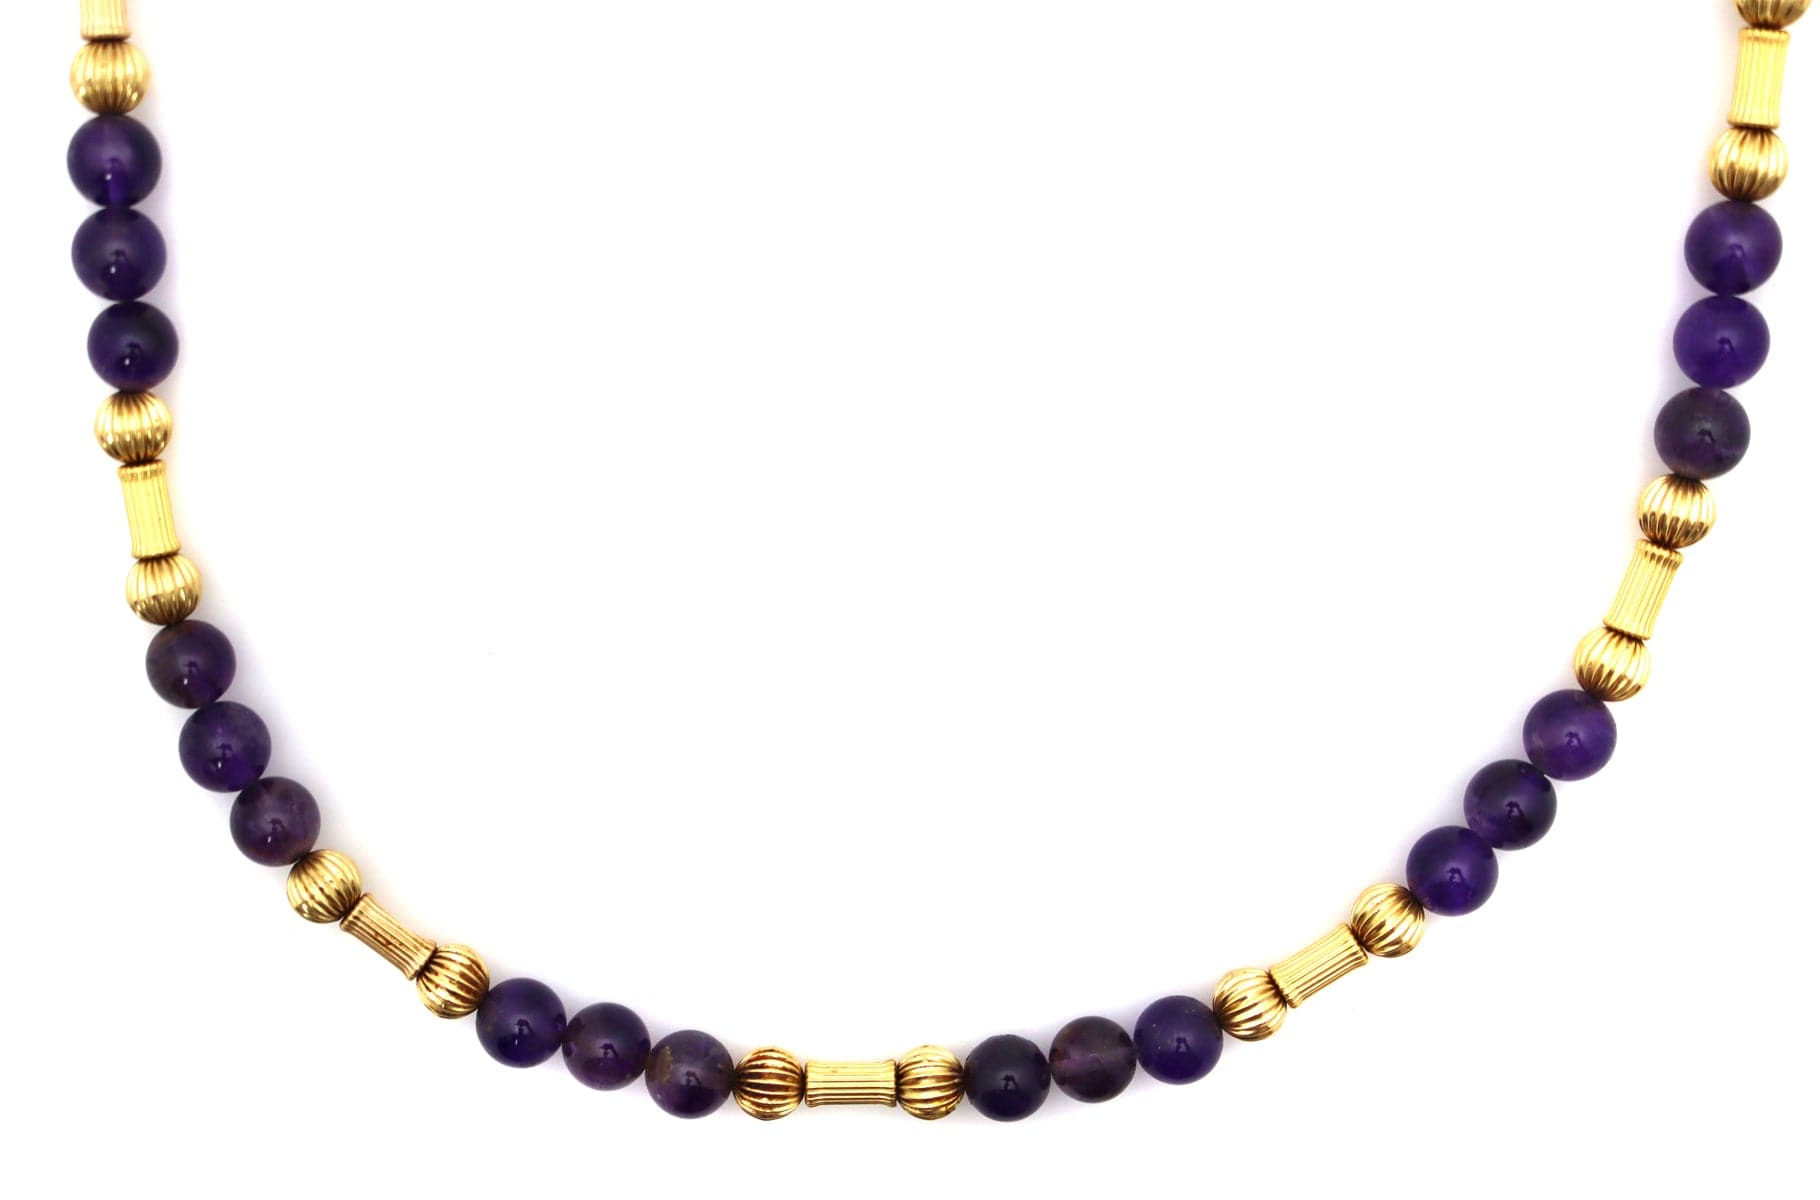 Amethyst and 14K Gold Beade Necklace, Strung by Frank Patania, Jr., 32" length (J91620A-0221-014)2